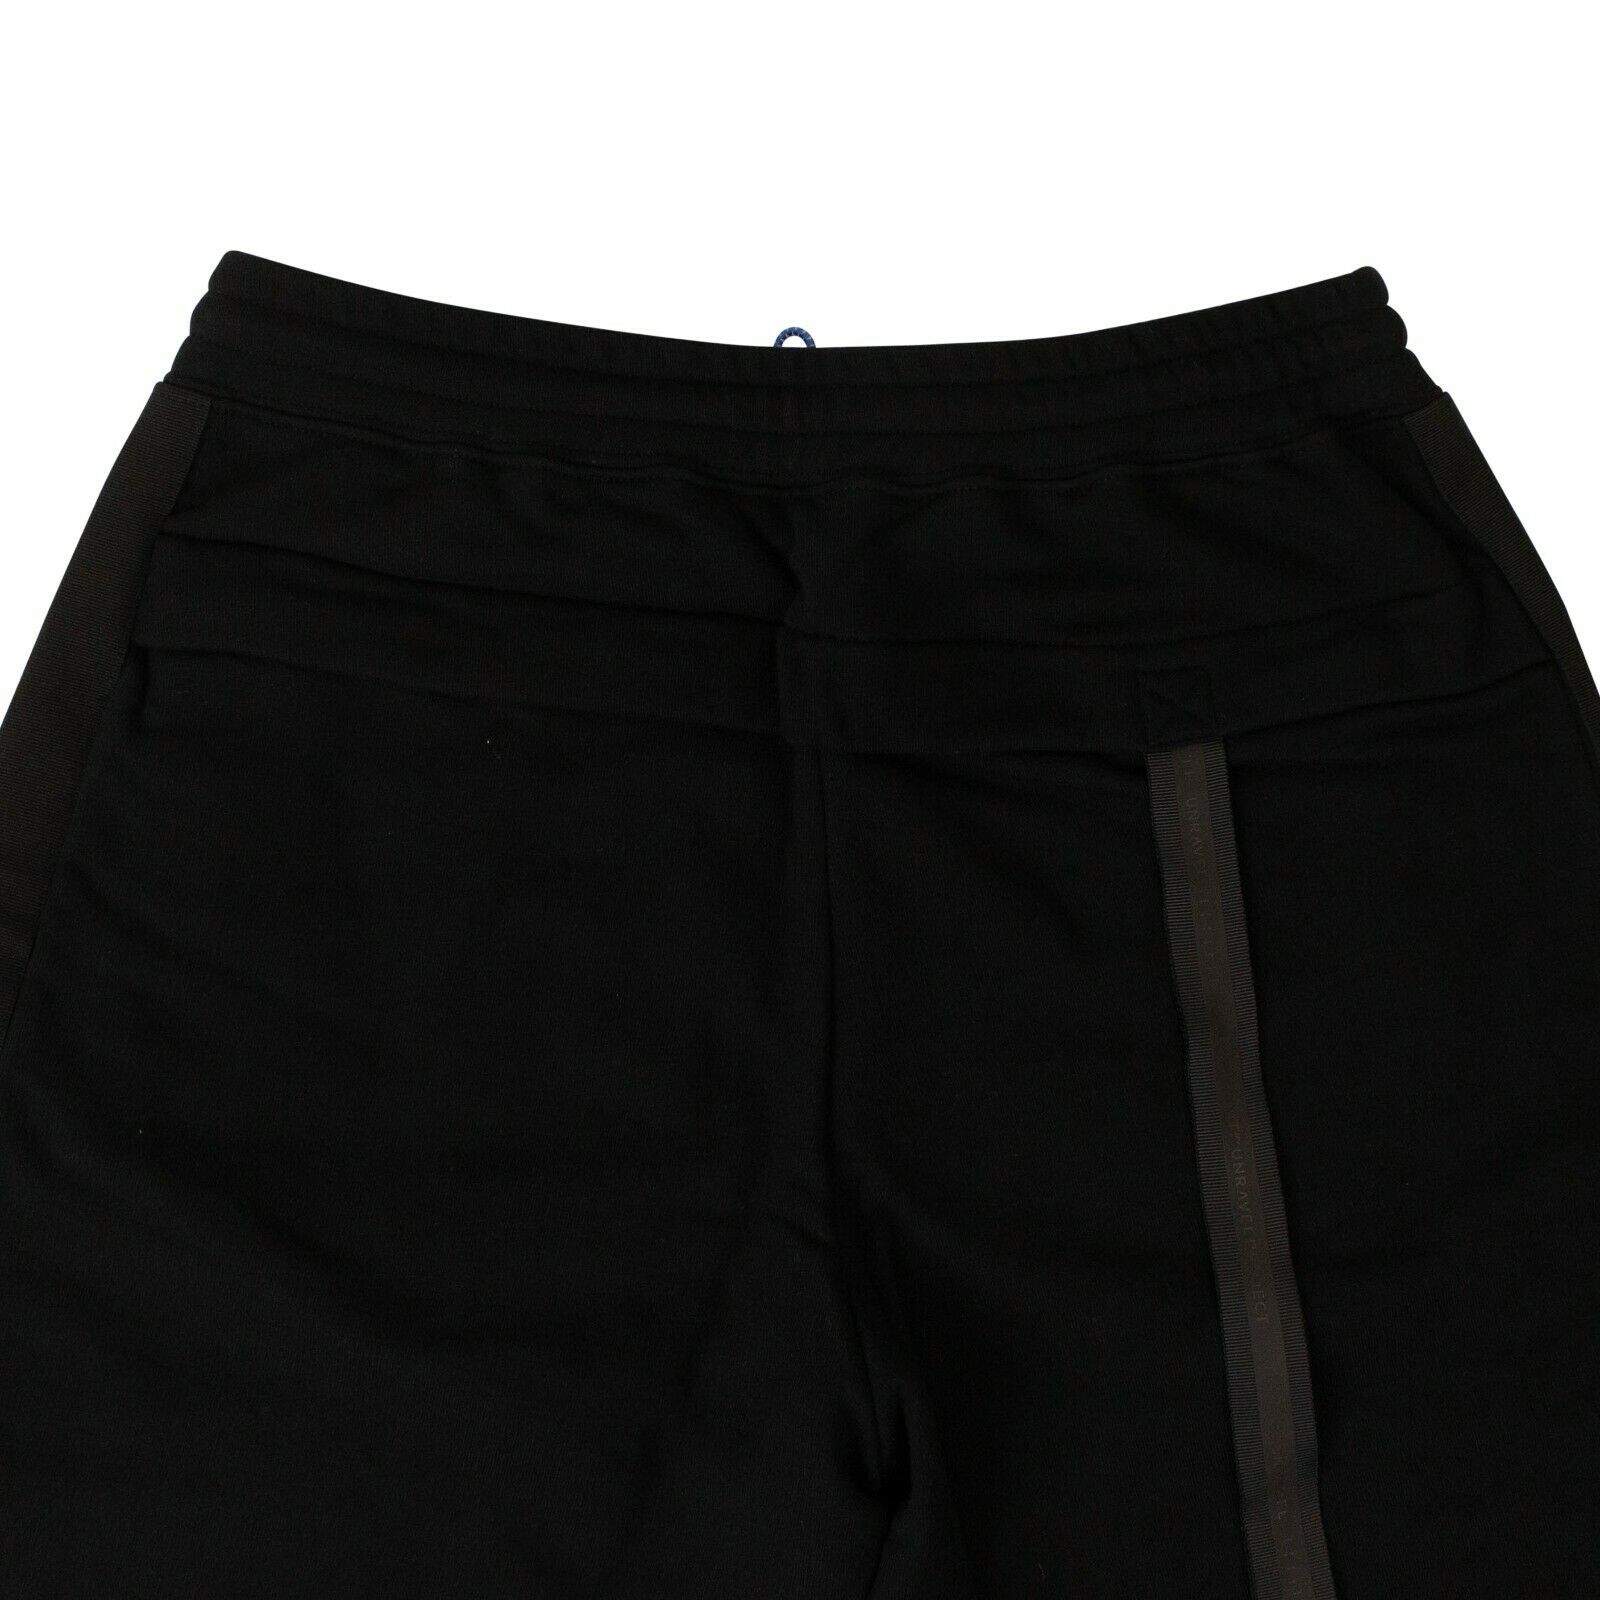 Unravel Project Taped Basketball Shorts - Black